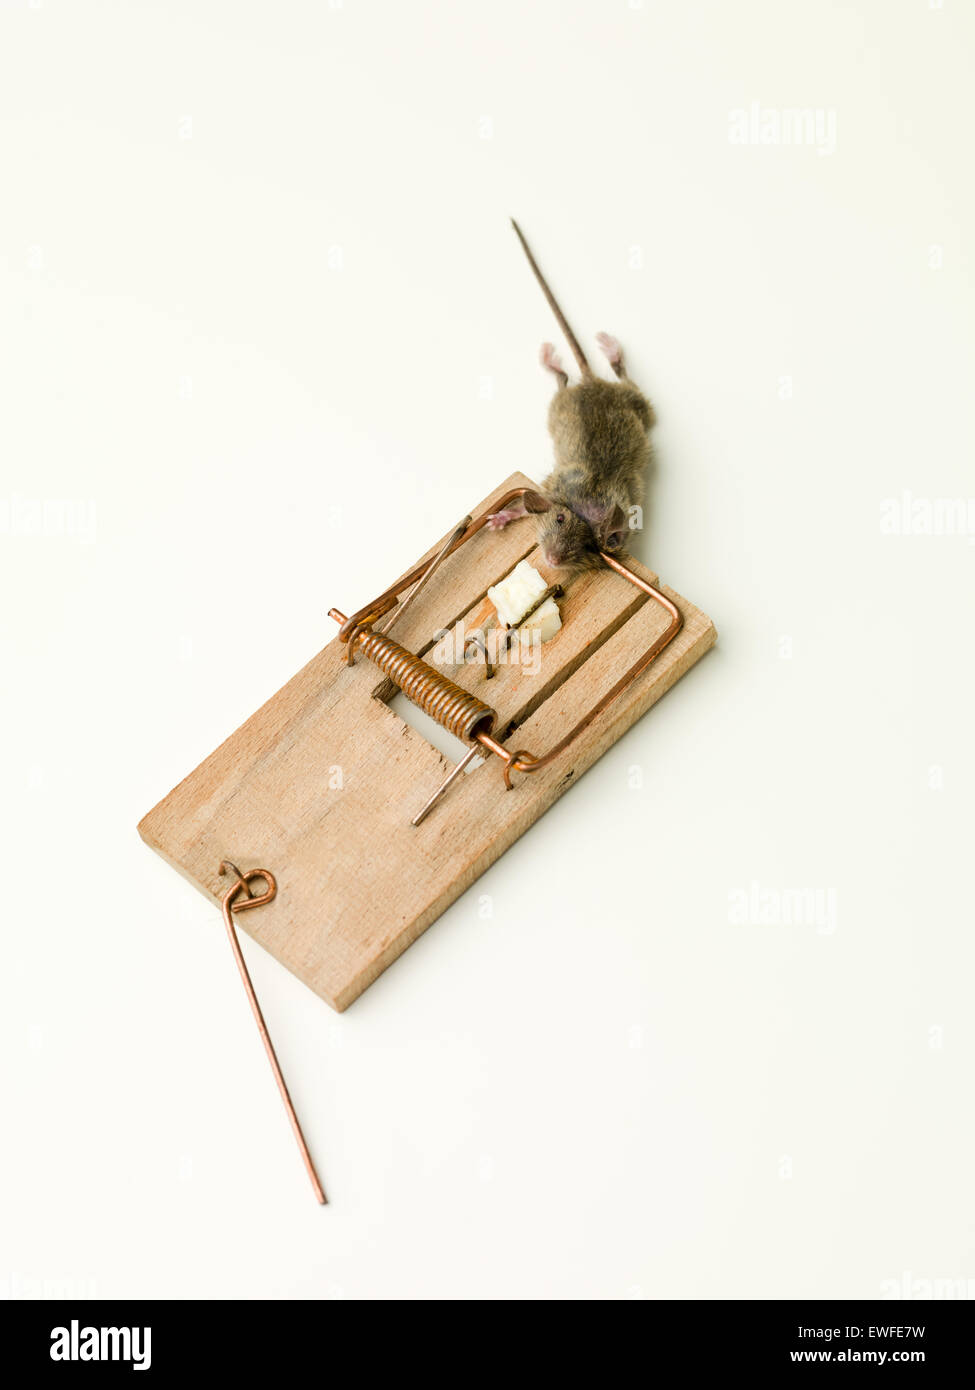 https://c8.alamy.com/comp/EWFE7W/small-mouse-caught-in-a-trap-EWFE7W.jpg